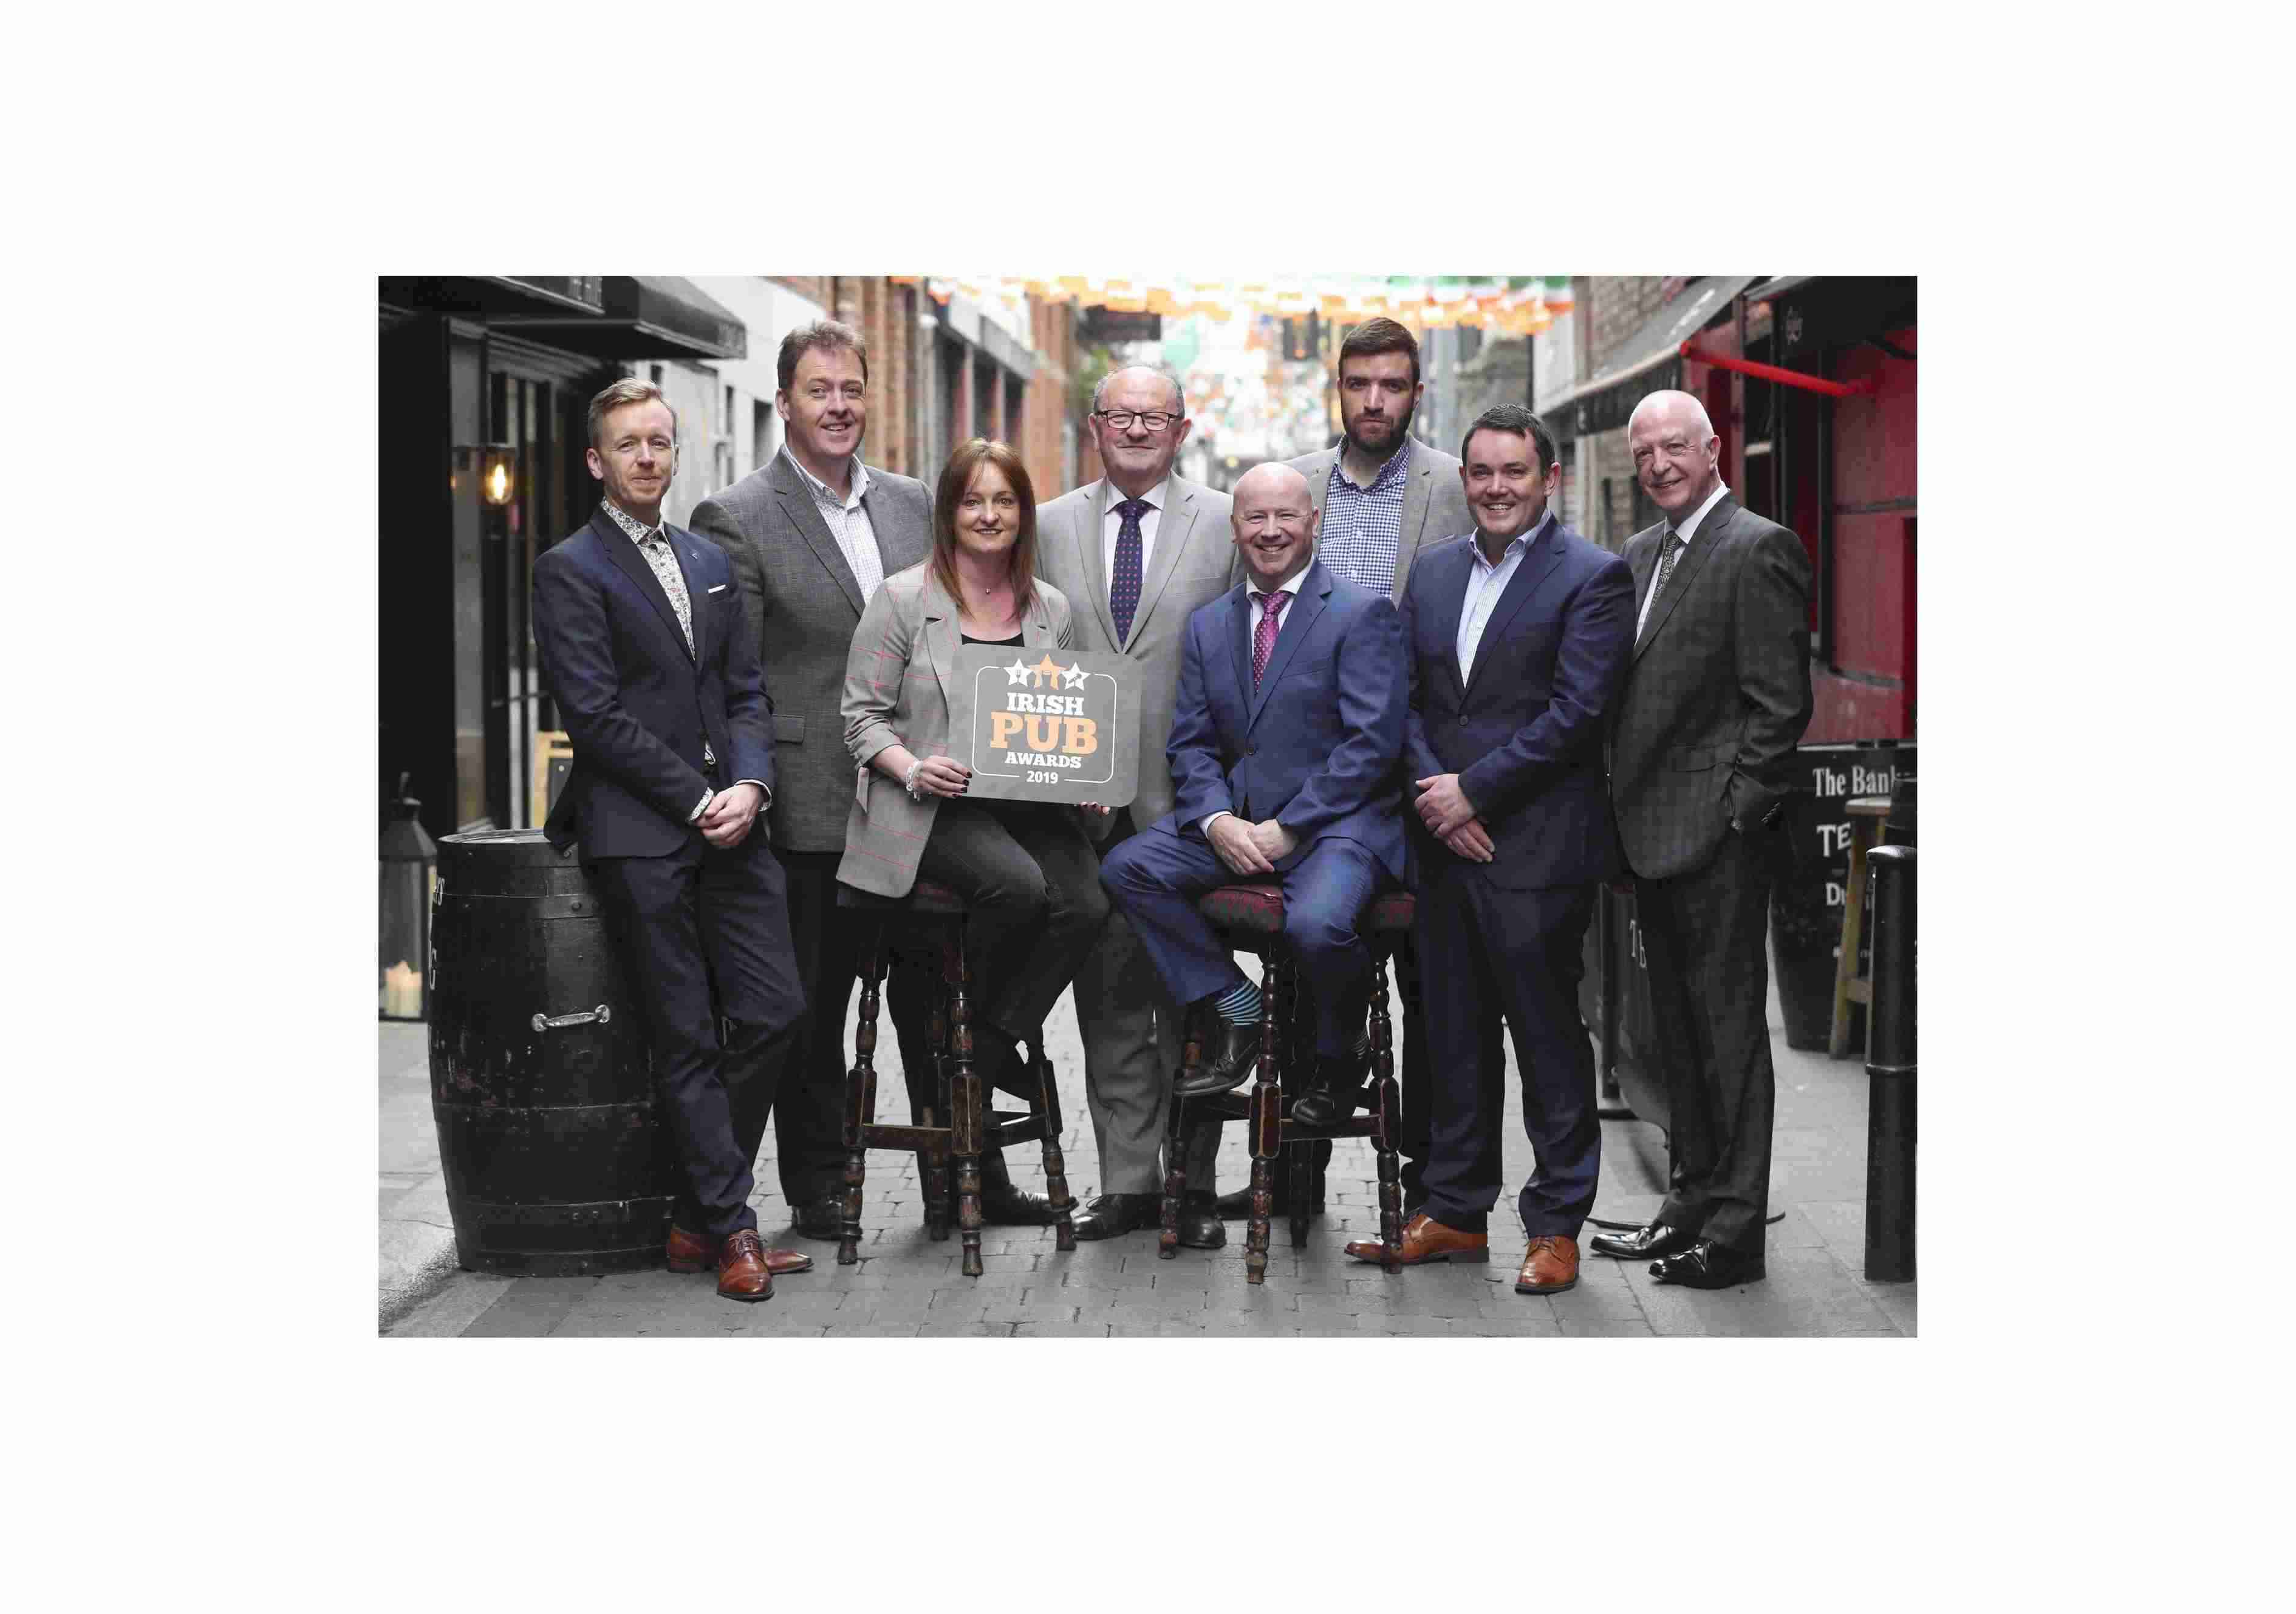 At the launch of the Irish Pub Awards 2019 were (from left): Damien Smyth of Musgrave MarketPlace; Ciaran Budds from Molson Coors, The Bankers Bar’s Leona Campbell, VFI President Padraic McGann, LVA Chairman Alan Campbell, C&C Gleeson’s Ross Bissett, Shane Barry, Diageo Ireland and Molson Coors’ Michael Dooley. At the launch of the Irish Pub Awards 2019 were (from left): Damien Smyth of Musgrave MarketPlace; Ciaran Budds from Molson Coors, The Bankers Bar’s Leona Campbell, VFI President Padraic McGann, LVA Chairman Alan Campbell, C&C Gleeson’s Ross Bissett, Shane Barry, Diageo Ireland and Molson Coors’ Michael Dooley, Molson Coors. 